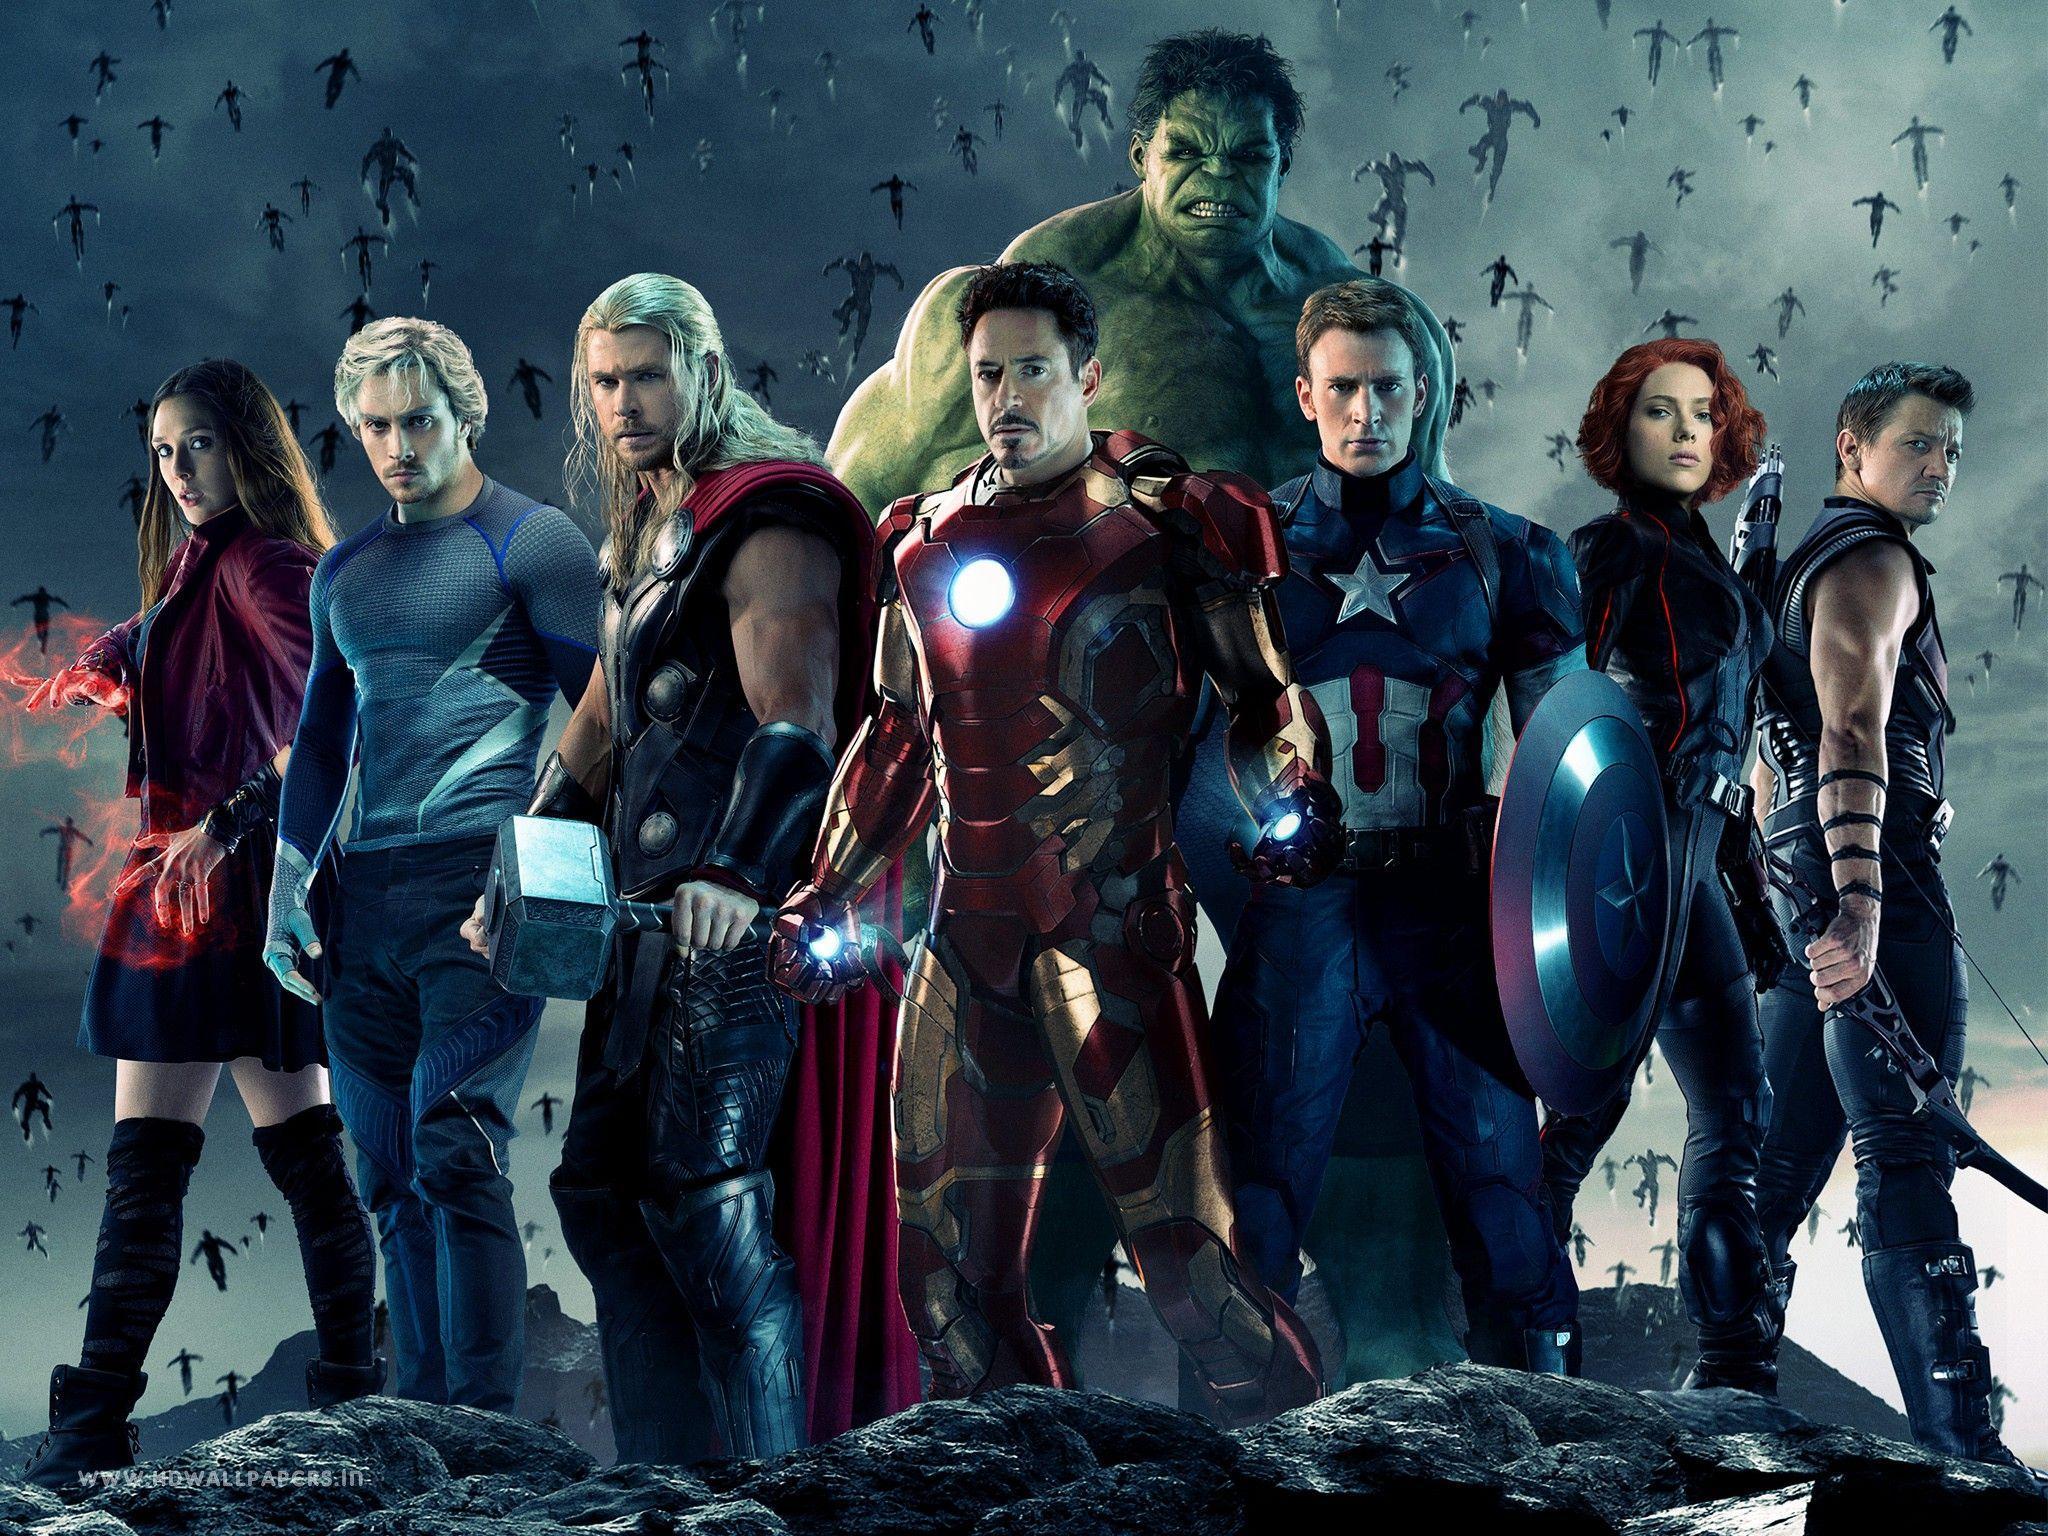 Avengers Age of Ultron 2015 Movie Wallpaper